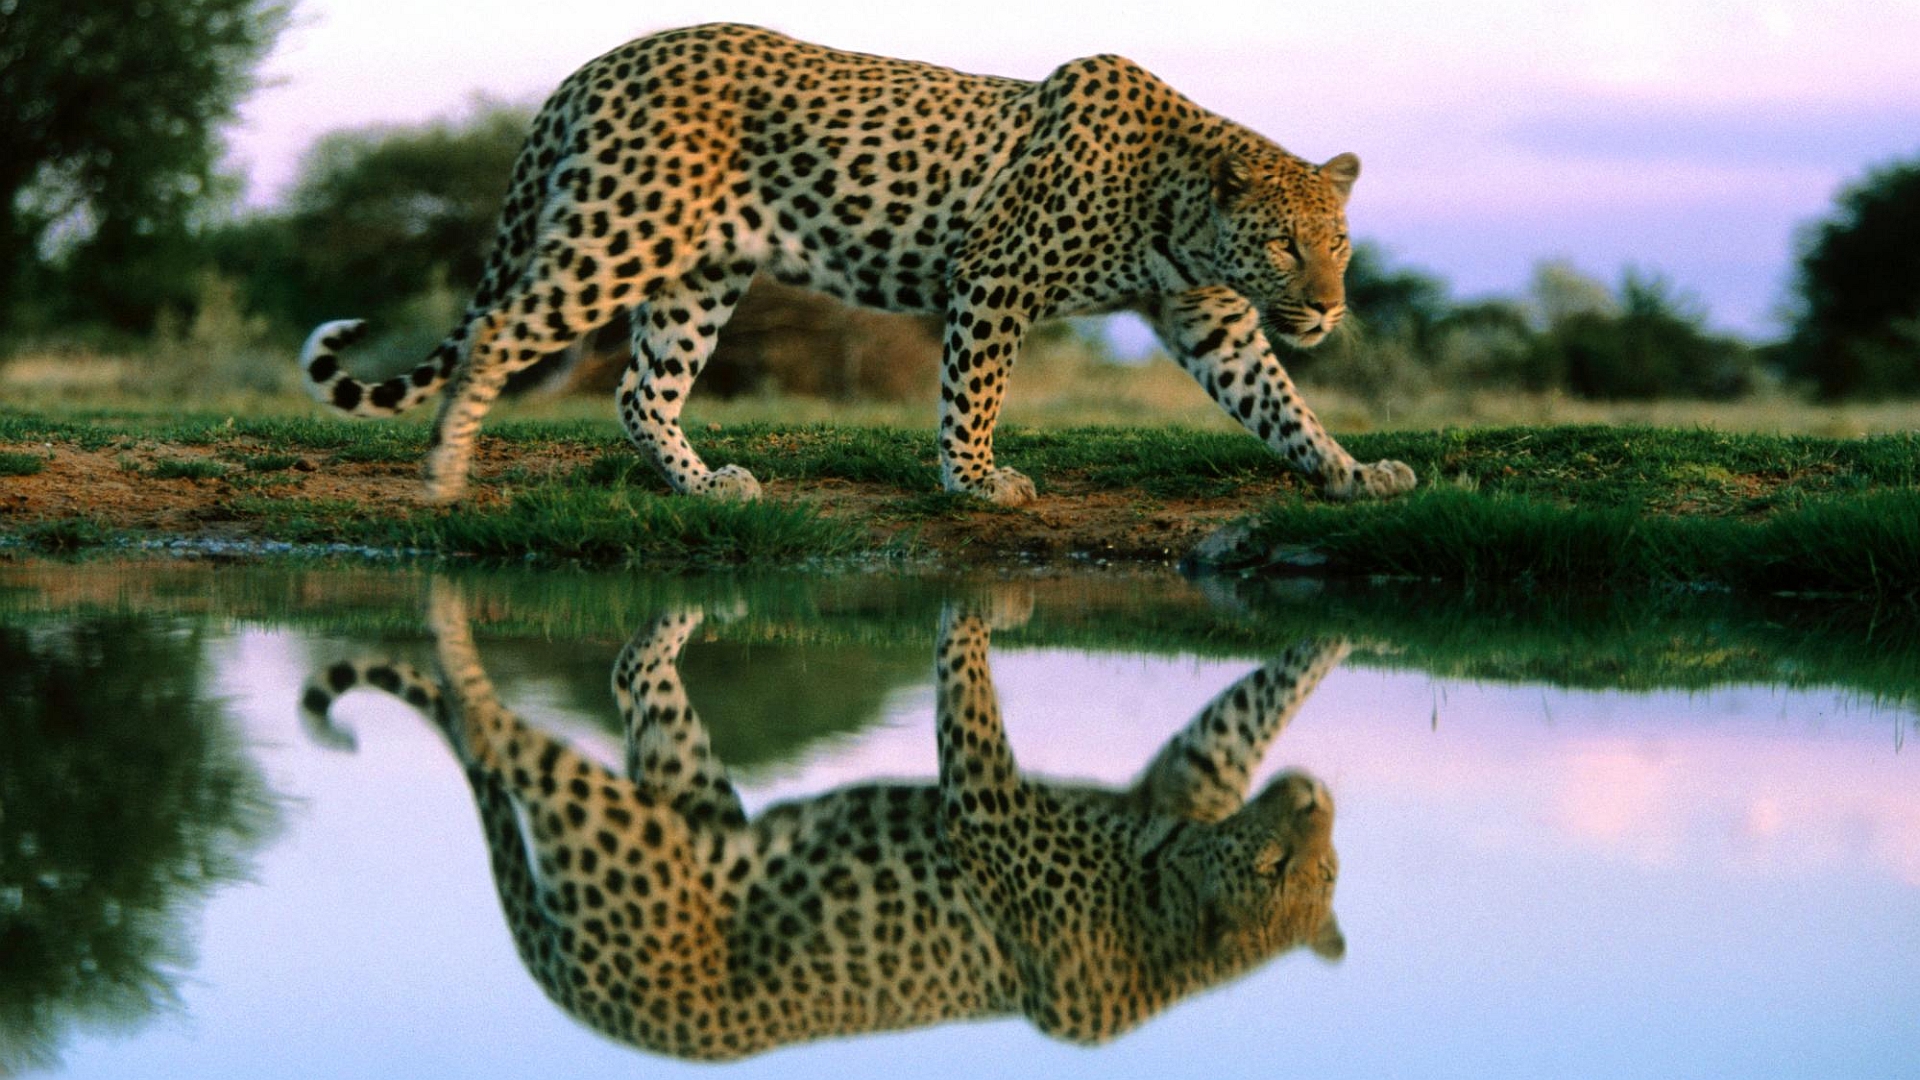 A majestic leopard against a stunning background - perfect for your desktop.